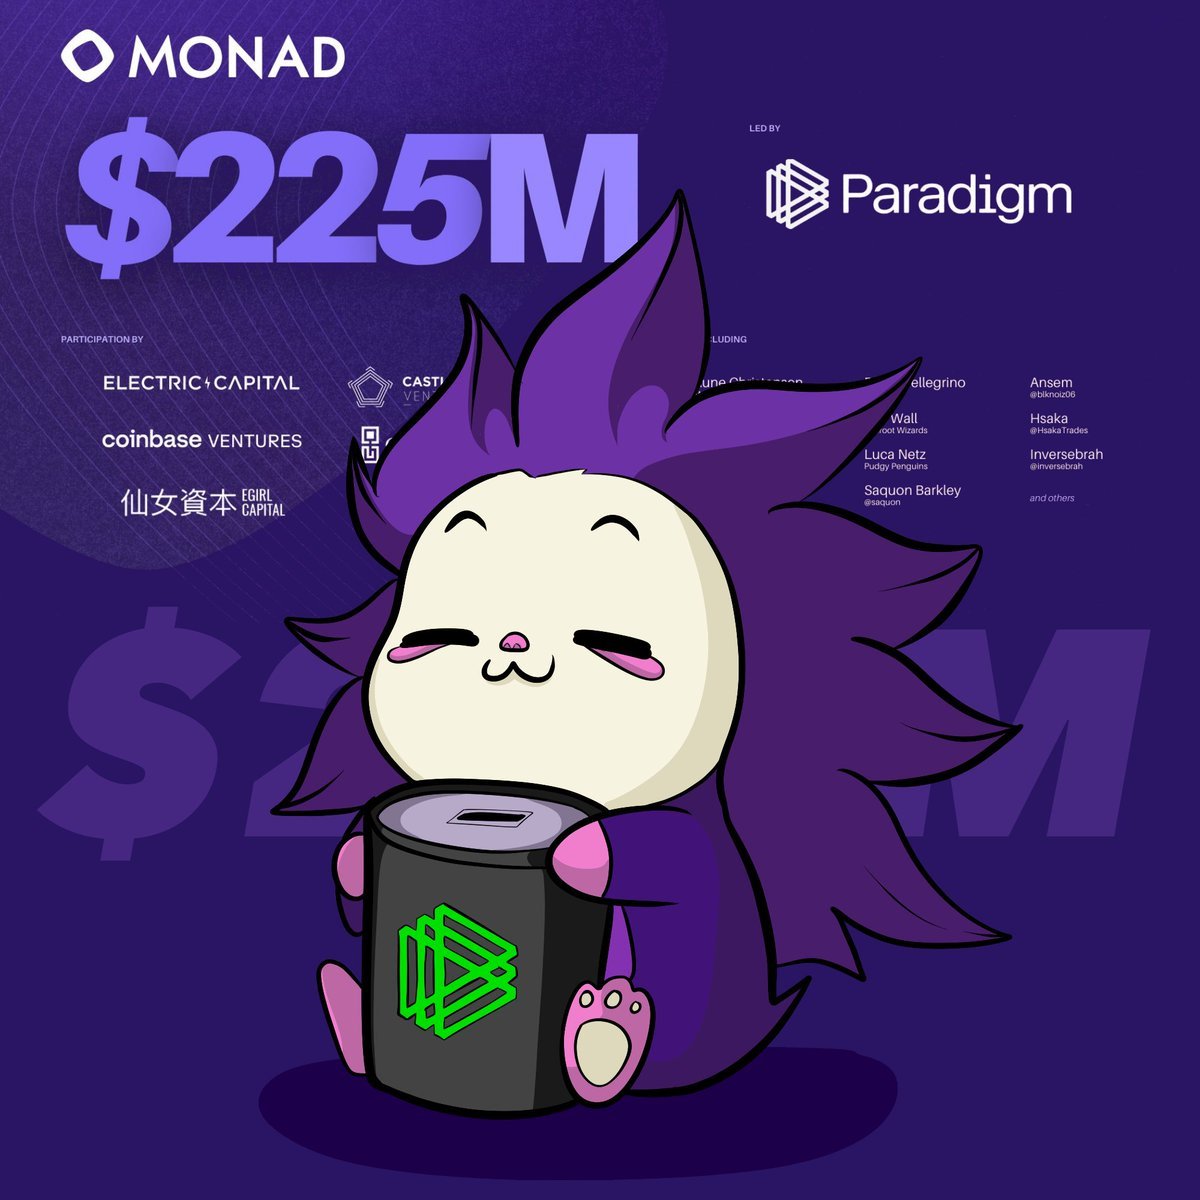 Honored to share that Monad Labs has raised $225M in funding from @paradigm and other leading investors. Thank you for this incredible vote of confidence. 💜 The funding provides our team with ample resources to bring Monad, the Parallel EVM L1 blockchain, to life.